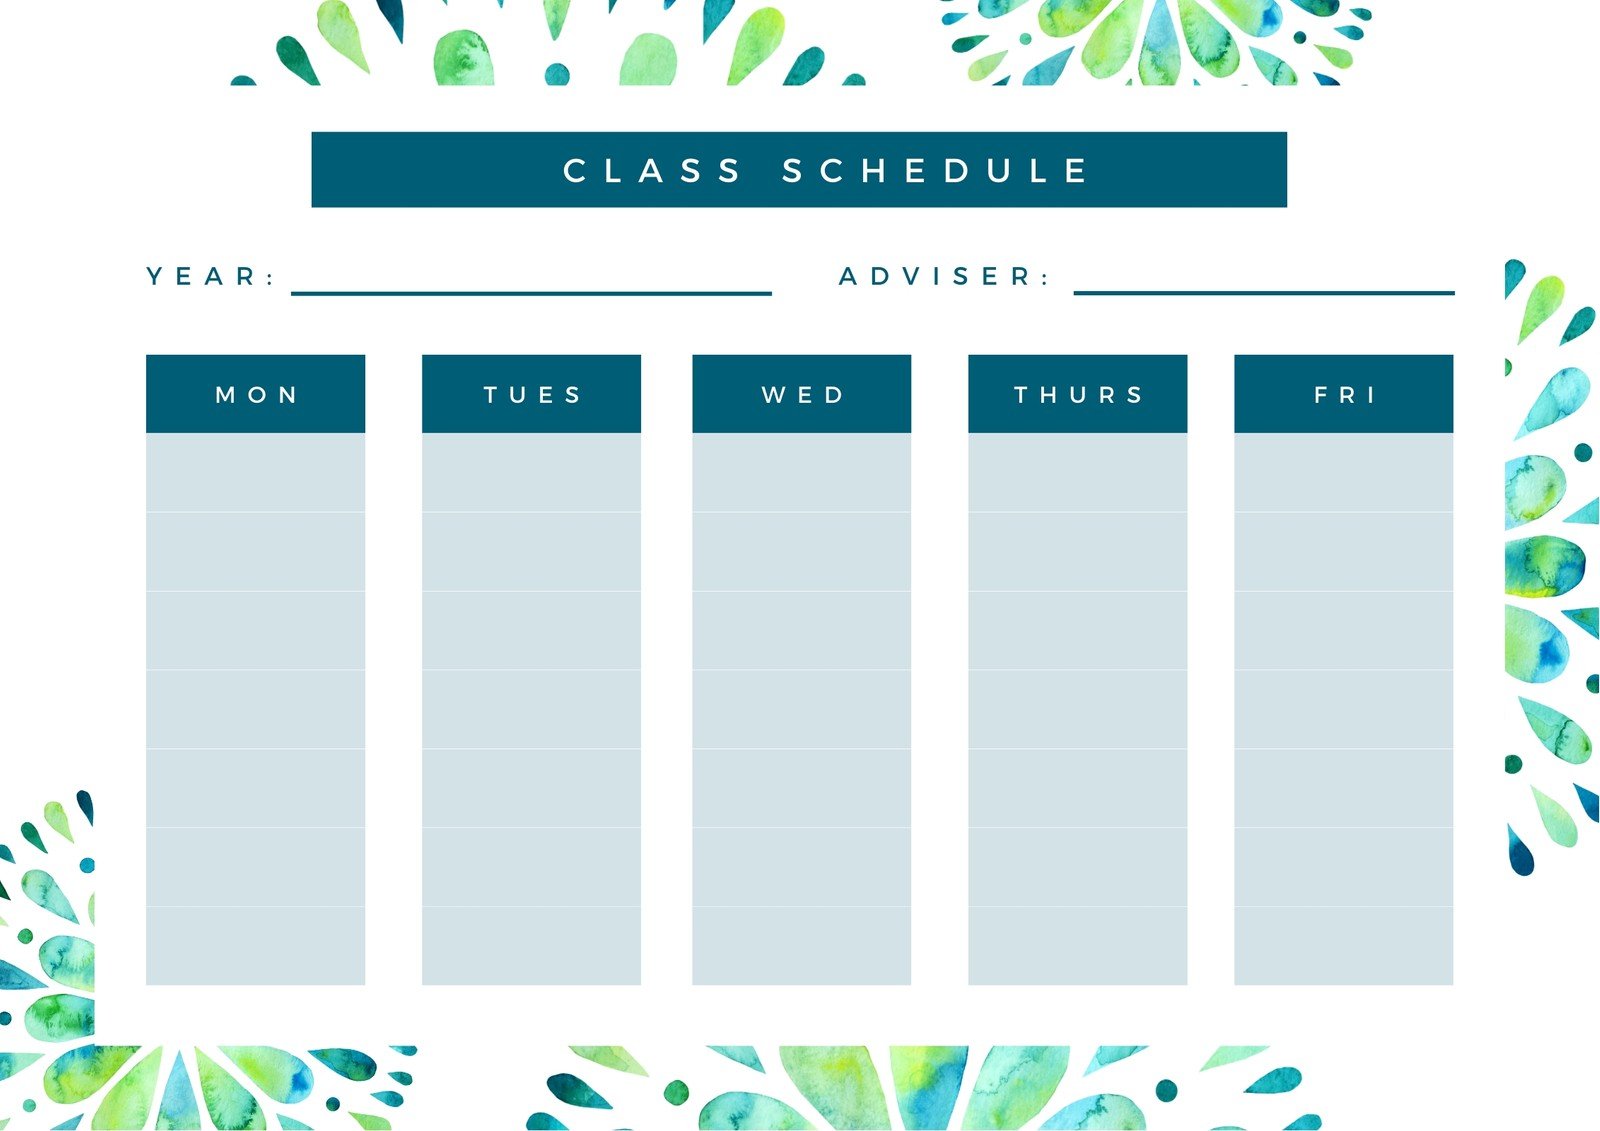 white-blue-green-class-schedule-templates-by-canva